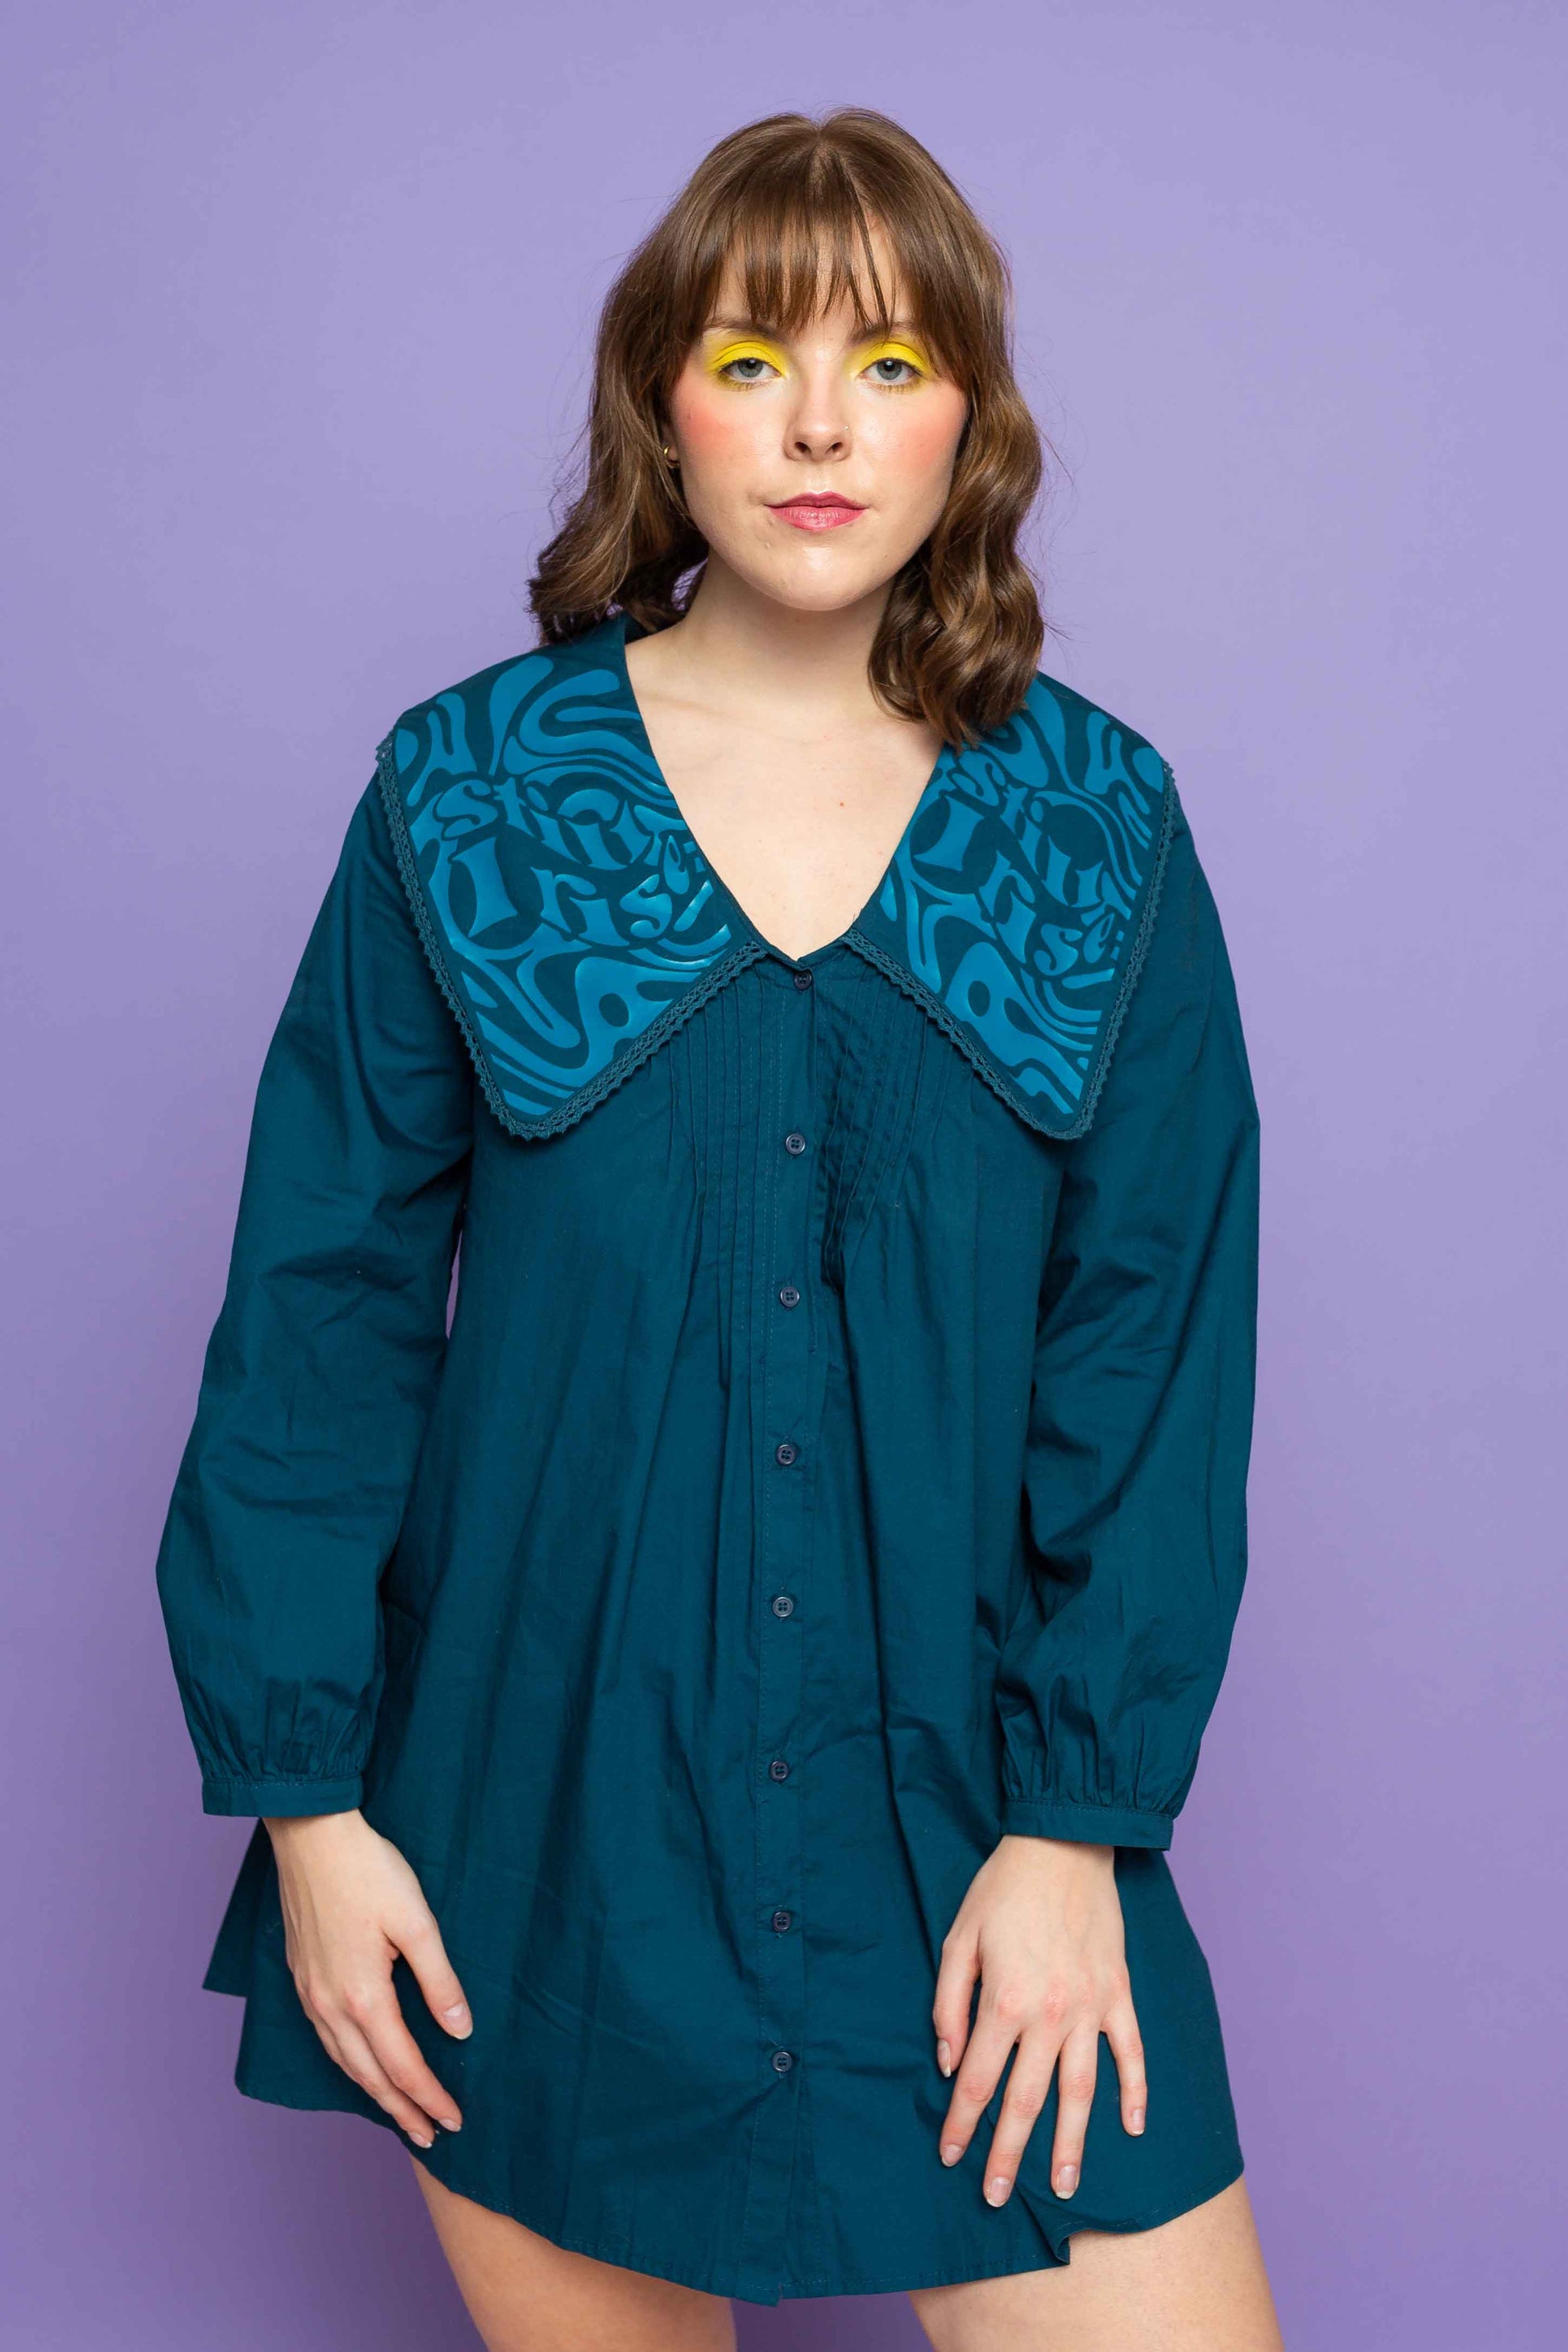 This is The Remix Dress STILL I RISE - Collared Mini Dress With Button Down Front In Dark Teal